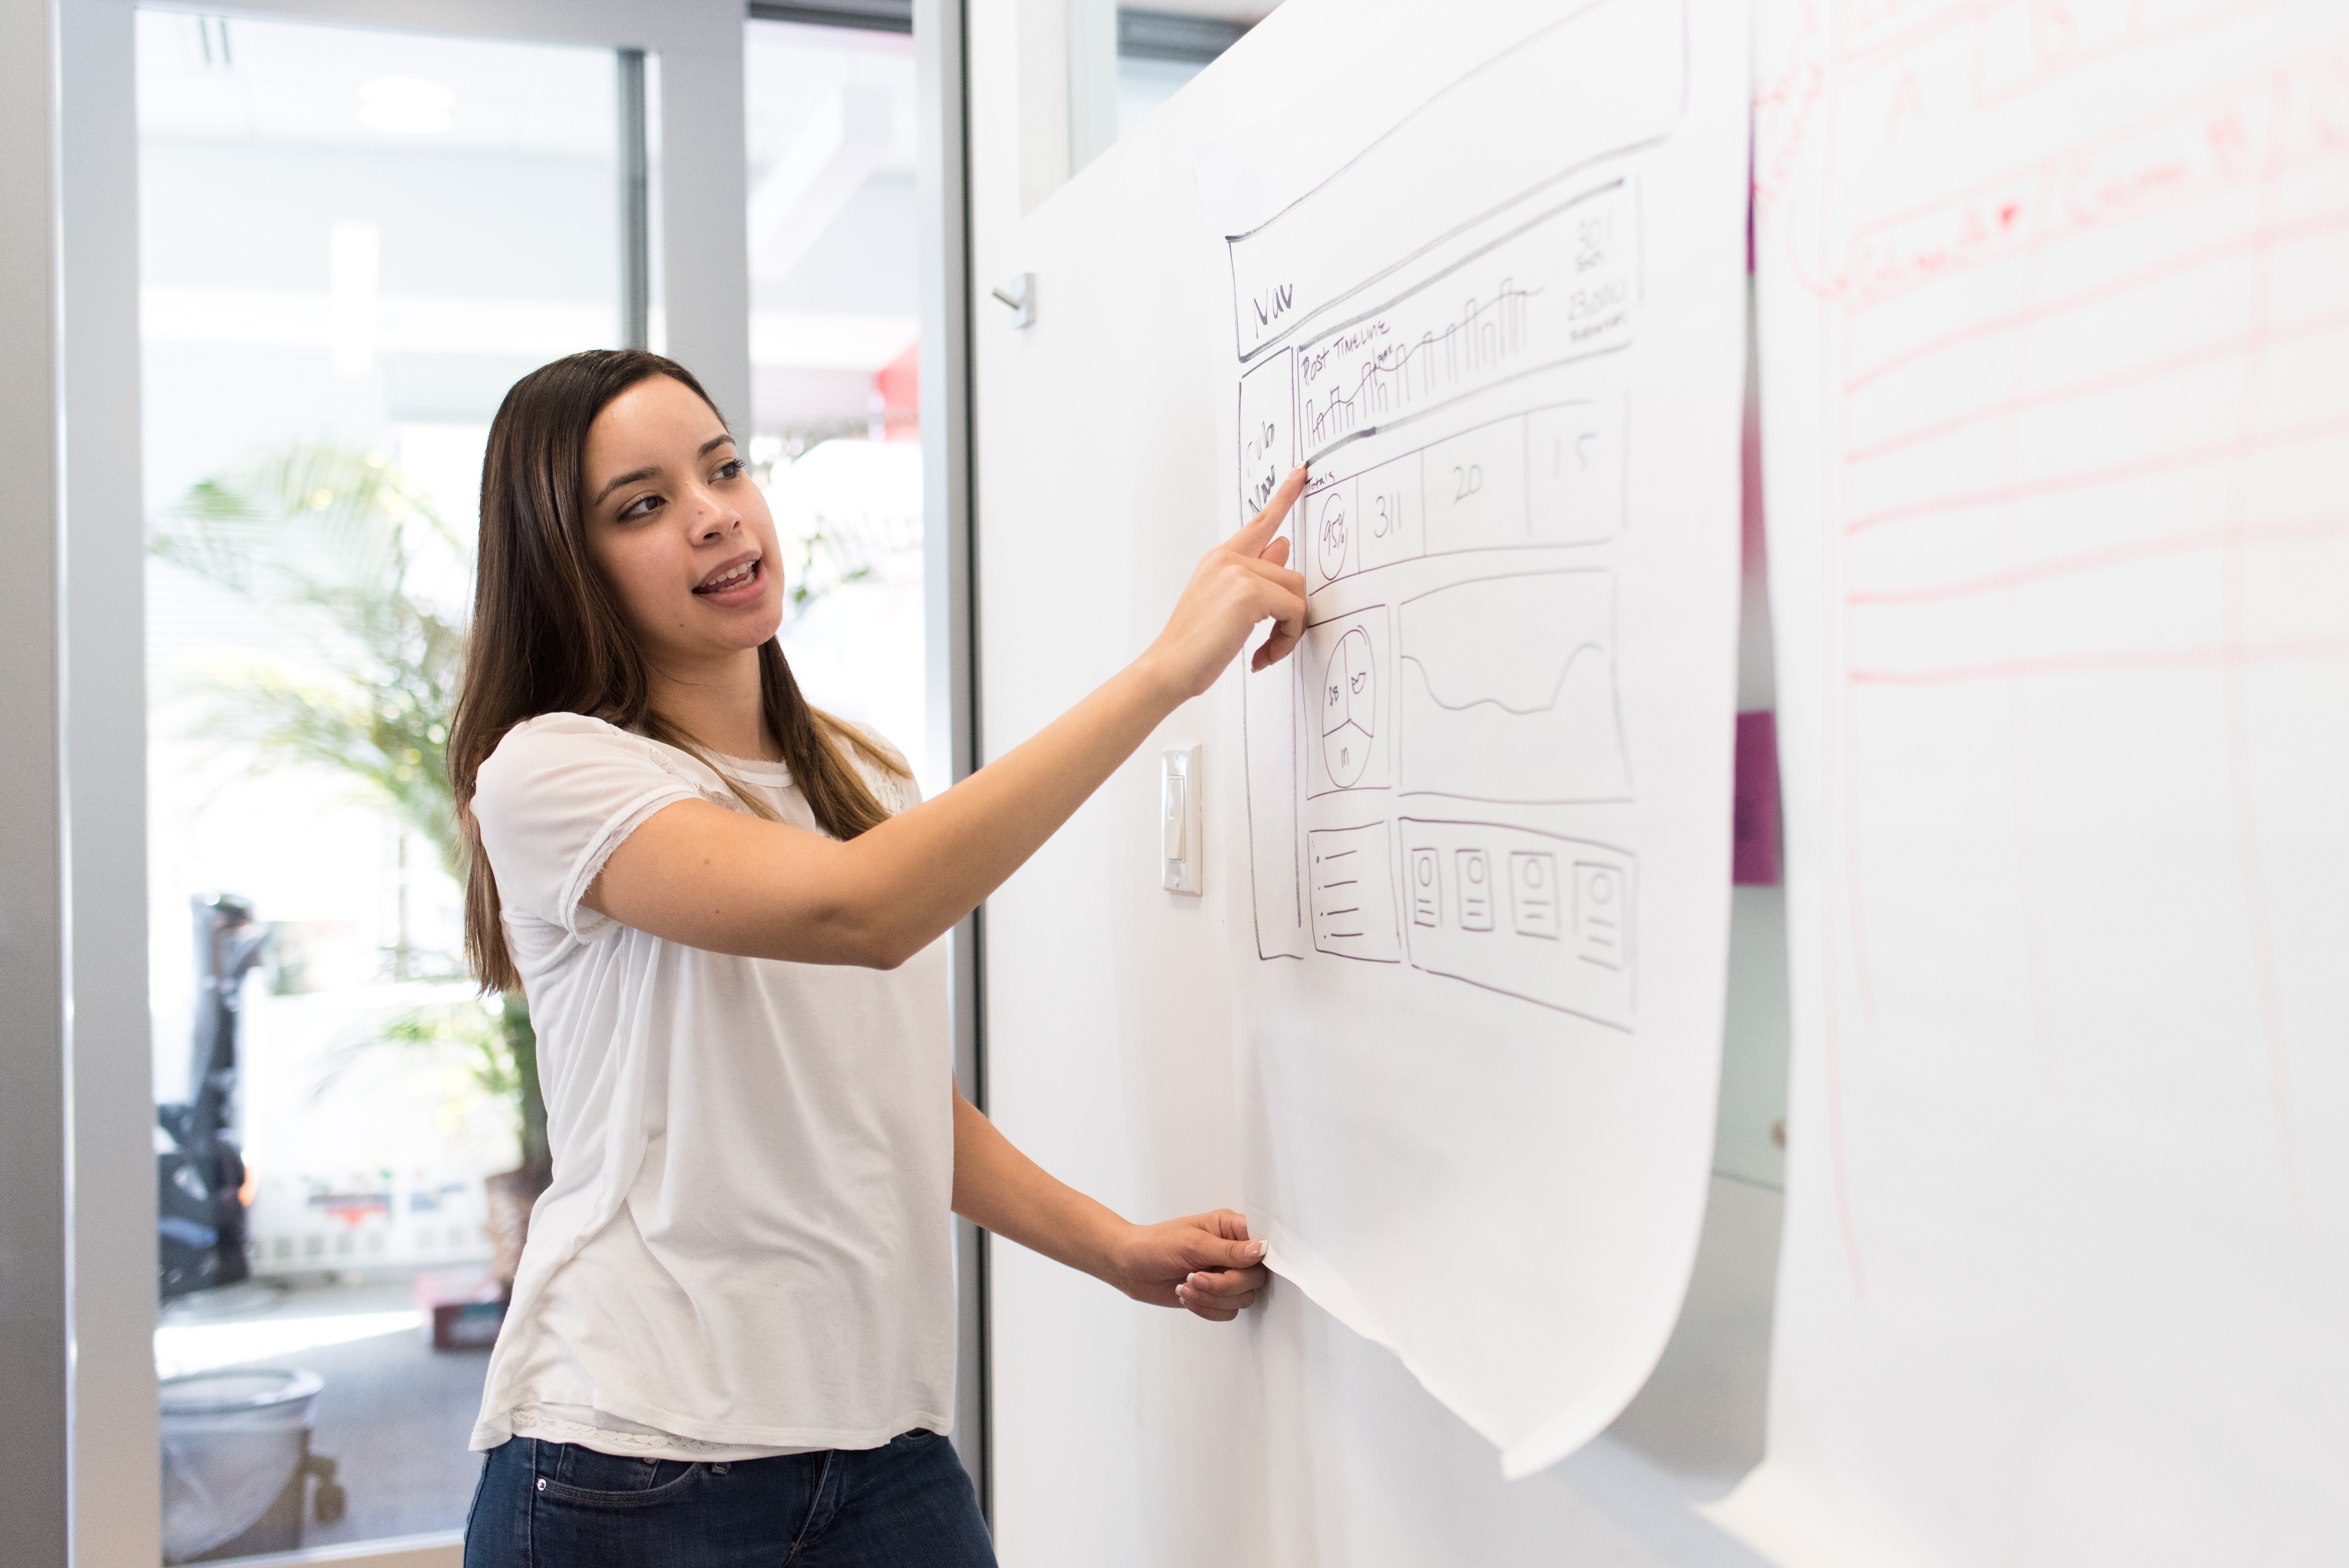 Female NetSuite professional pointing to a project plan on a white board